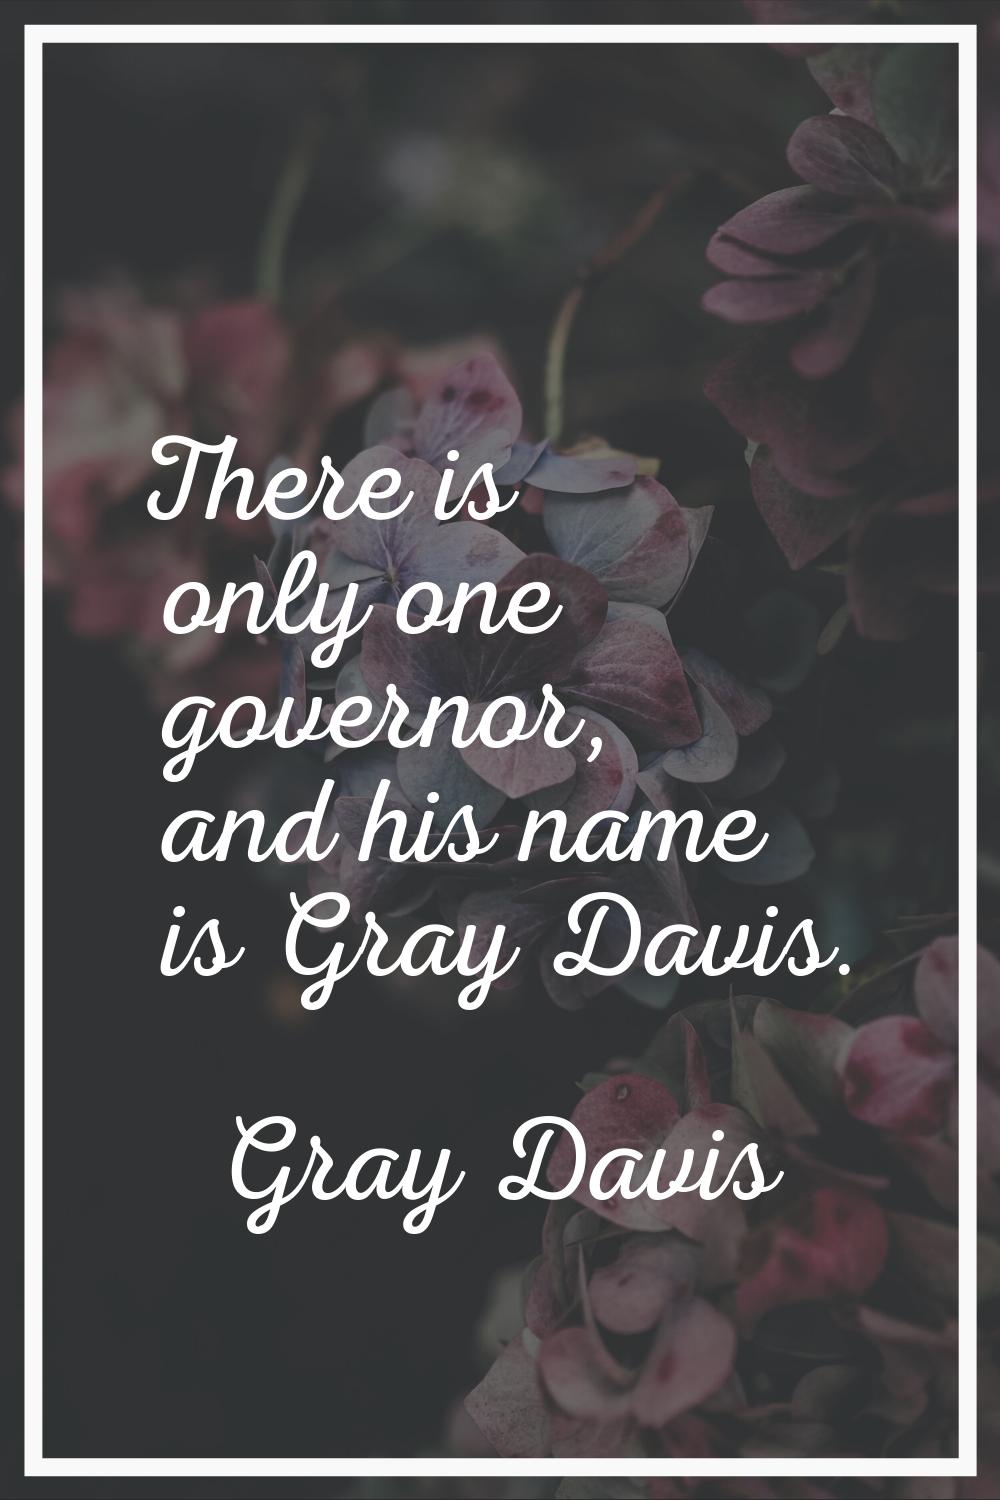 There is only one governor, and his name is Gray Davis.